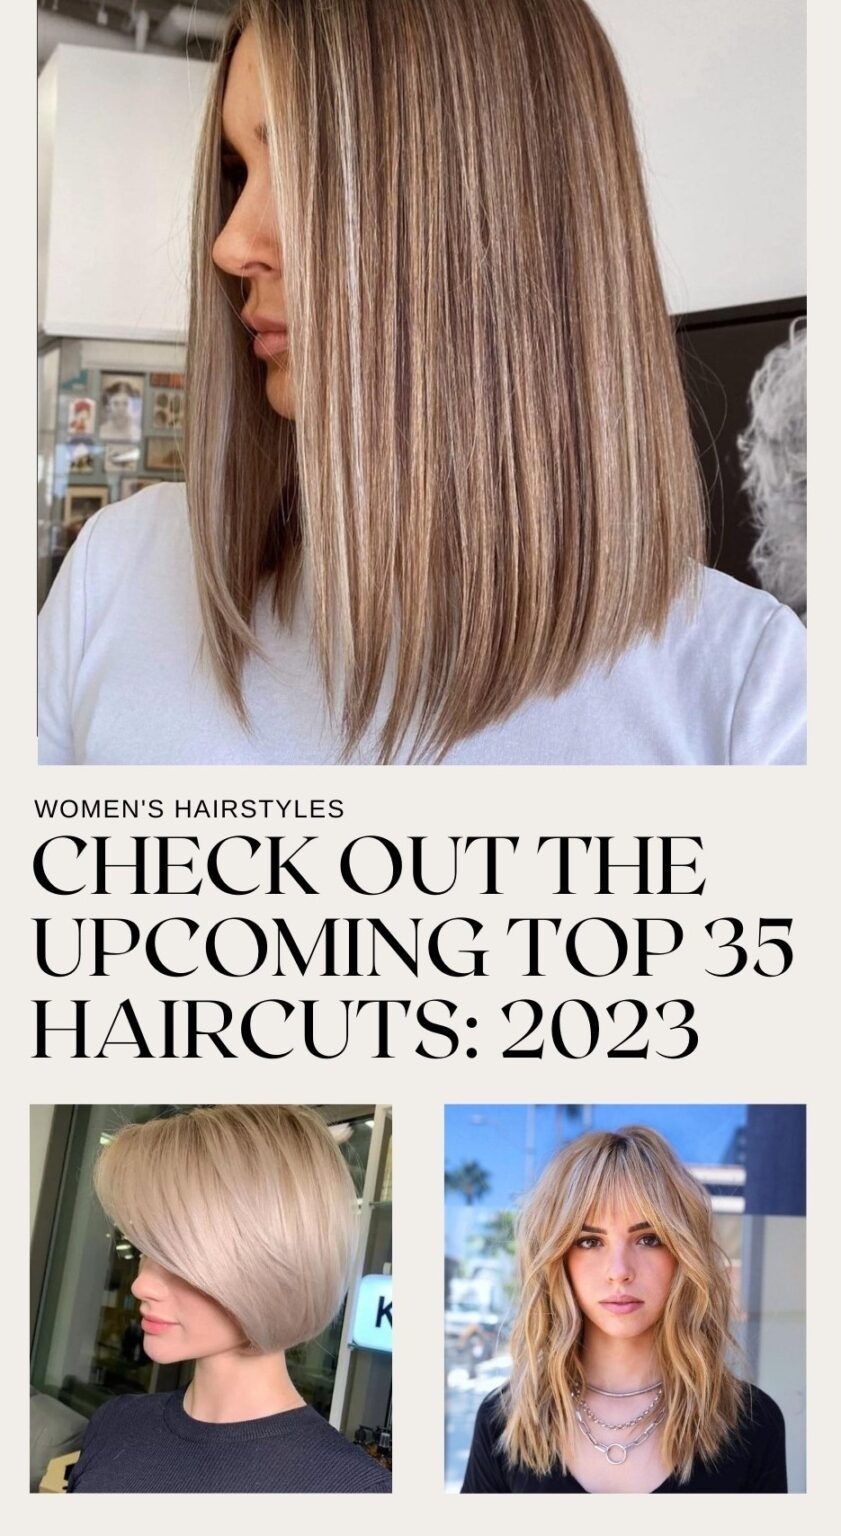 Check Out the Upcoming Top 35 Haircuts: 2023 - Top Beauty Magazines